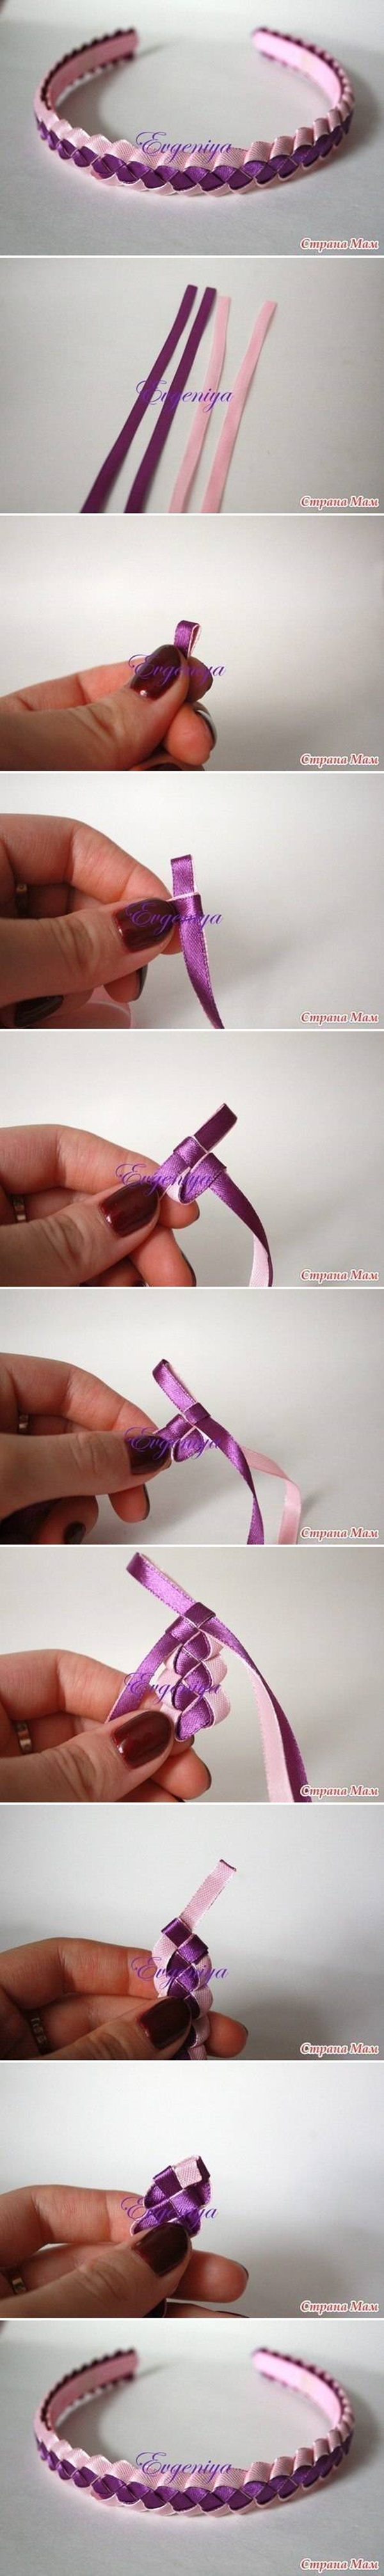 Different Ways to Use Ribbons 6